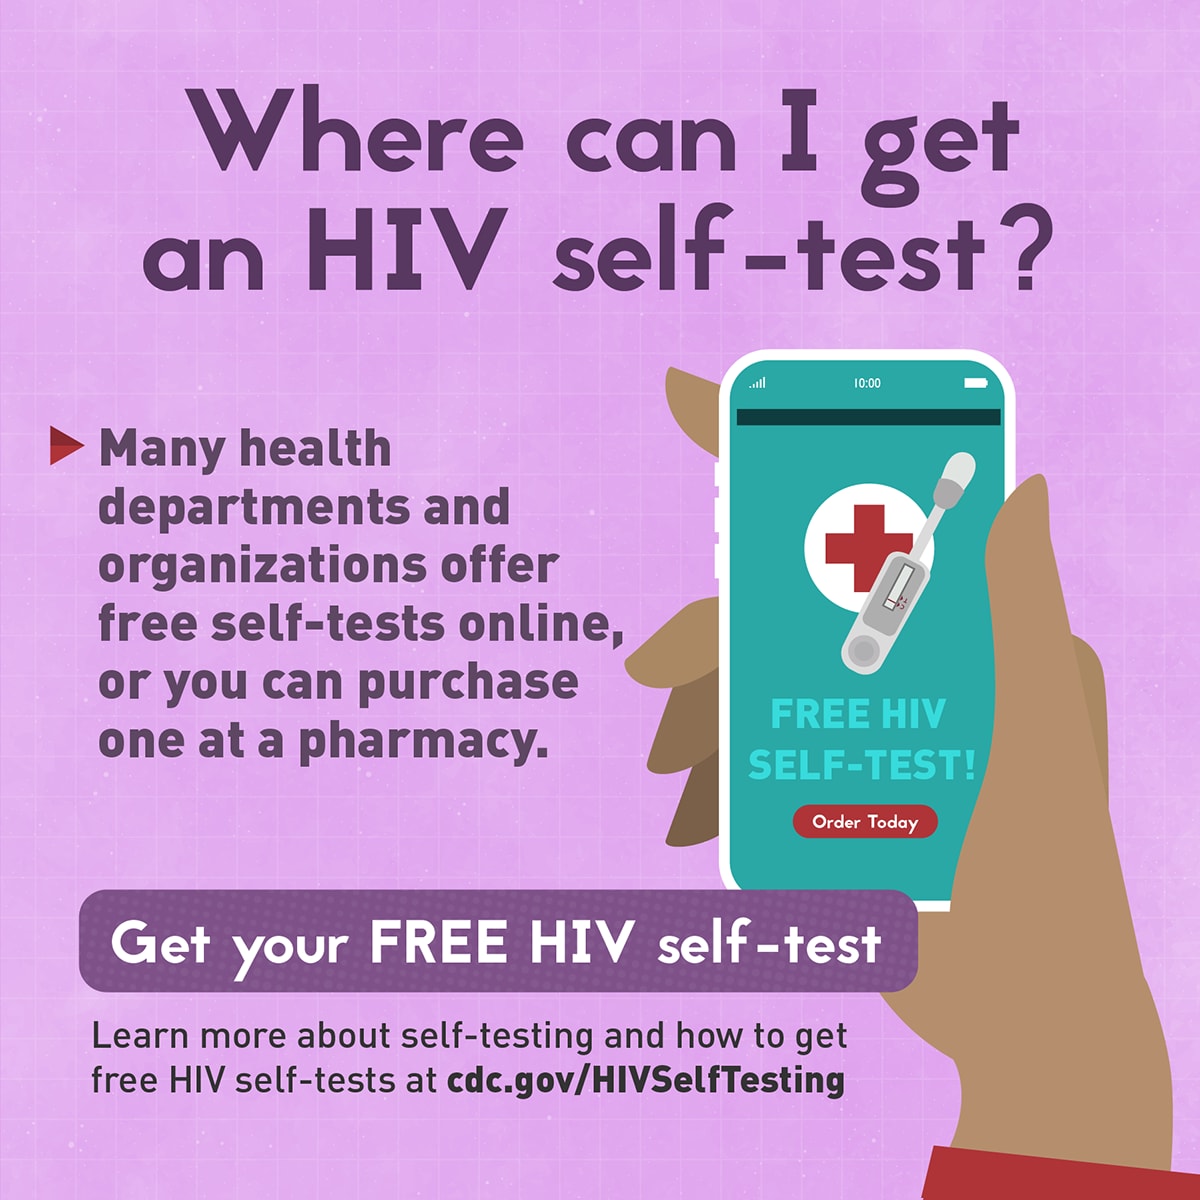 Where can I get an HIV self test?